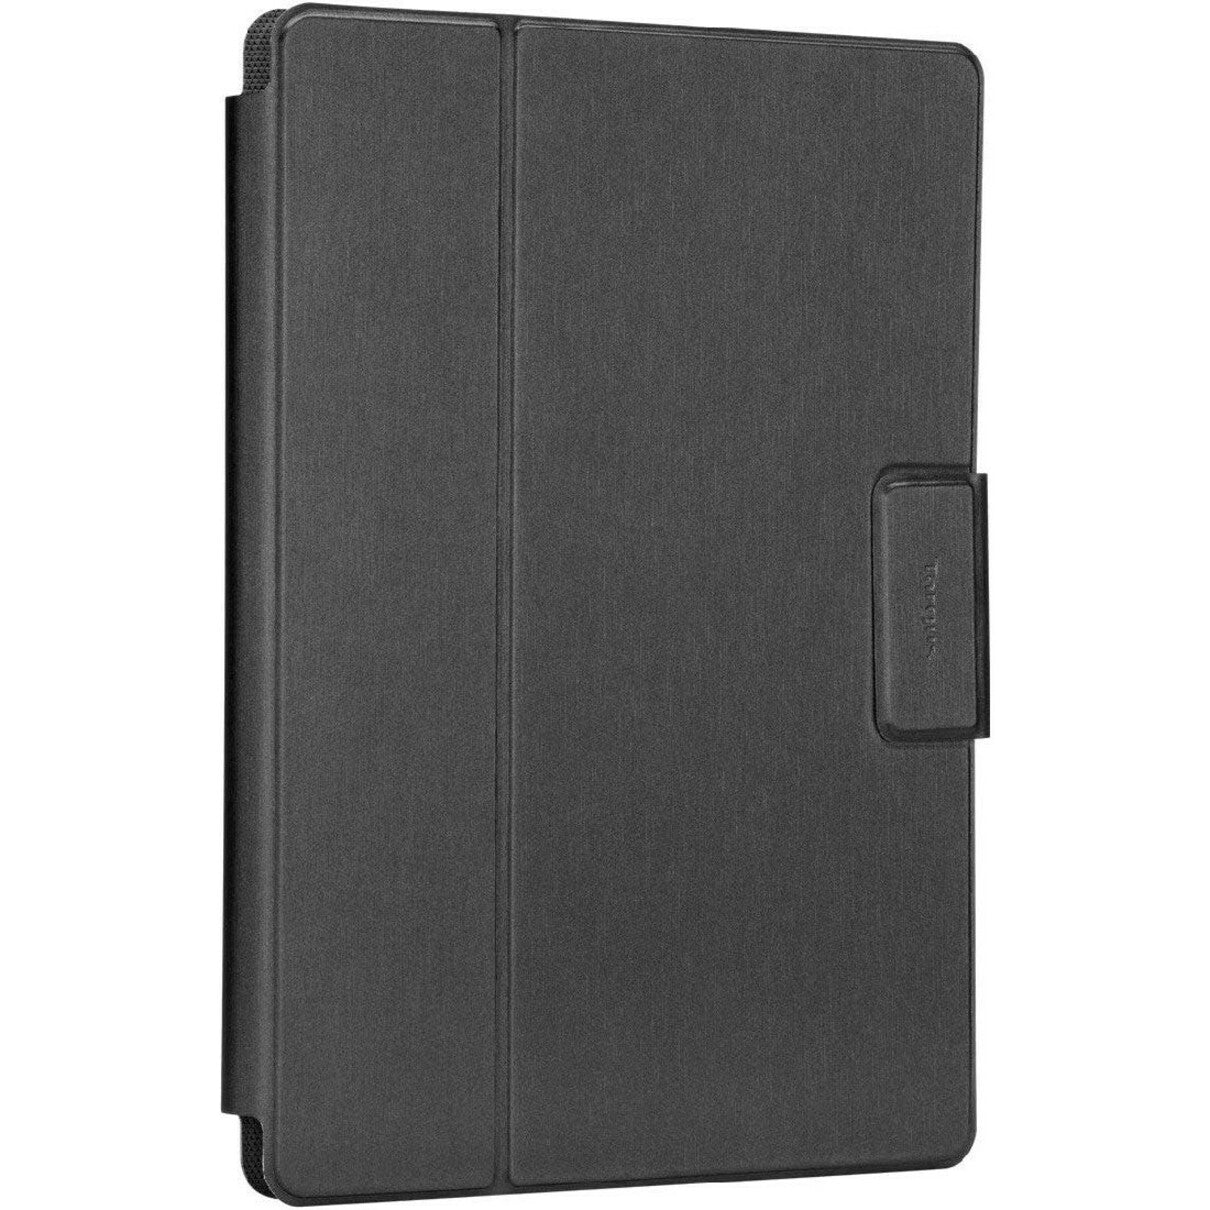 Targus SafeFit THZ785GL Carrying Case (Folio) for 9" to 11" Tablet - Black